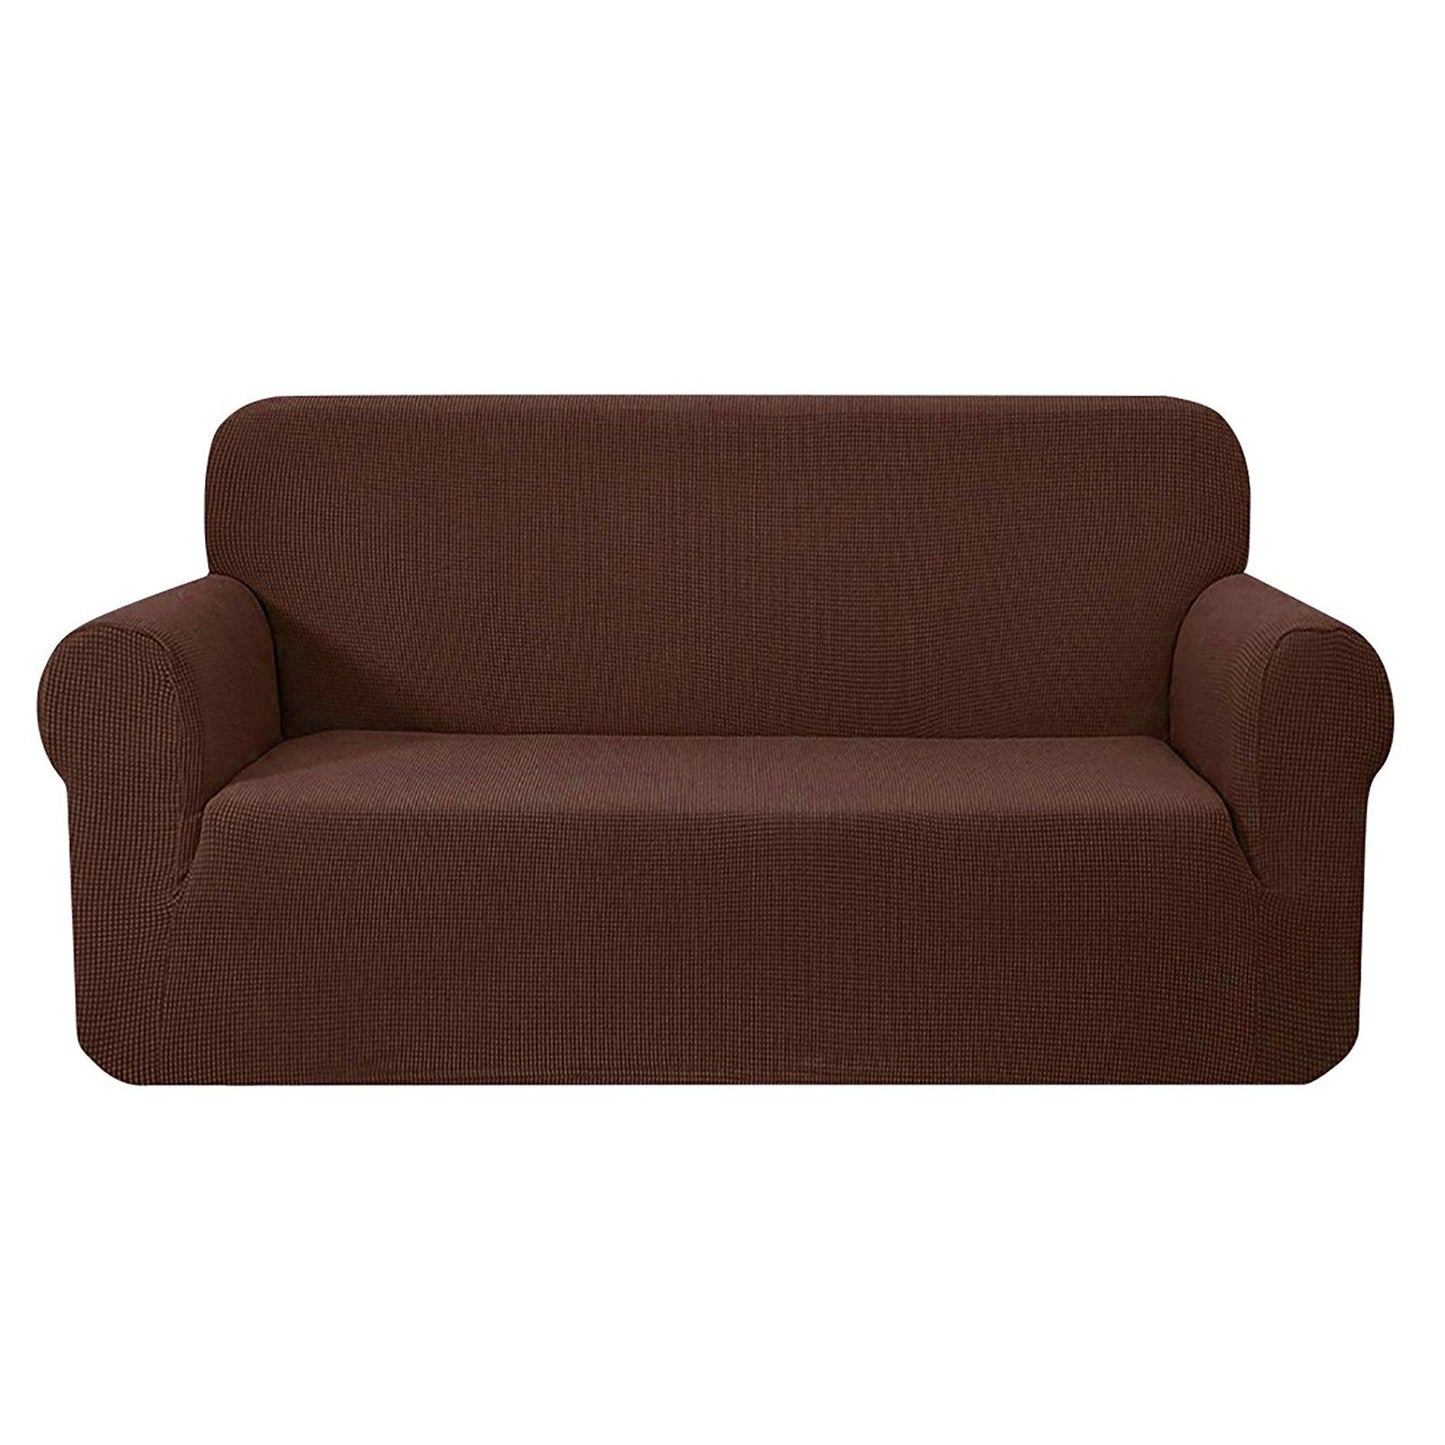 Artiss High Stretch Sofa Cover Couch Protector Slipcovers 3 Seater Coffee